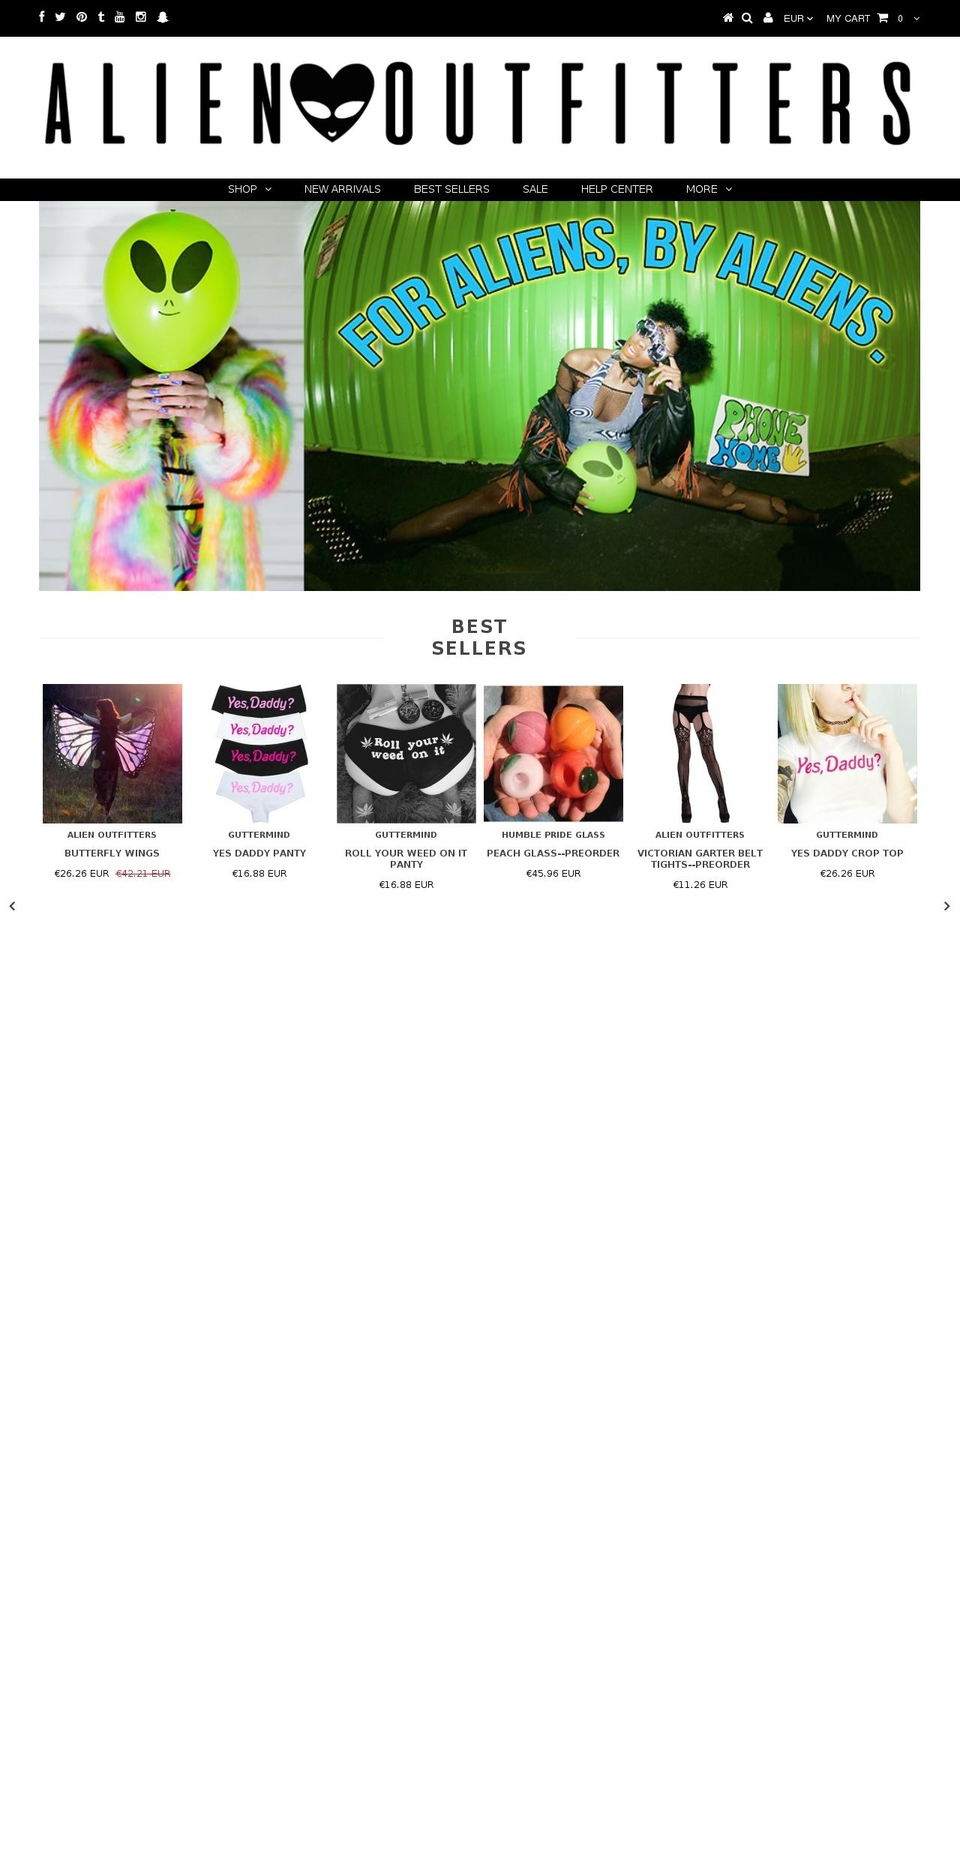 Broadcast Shopify theme site example alienoutfitters.com